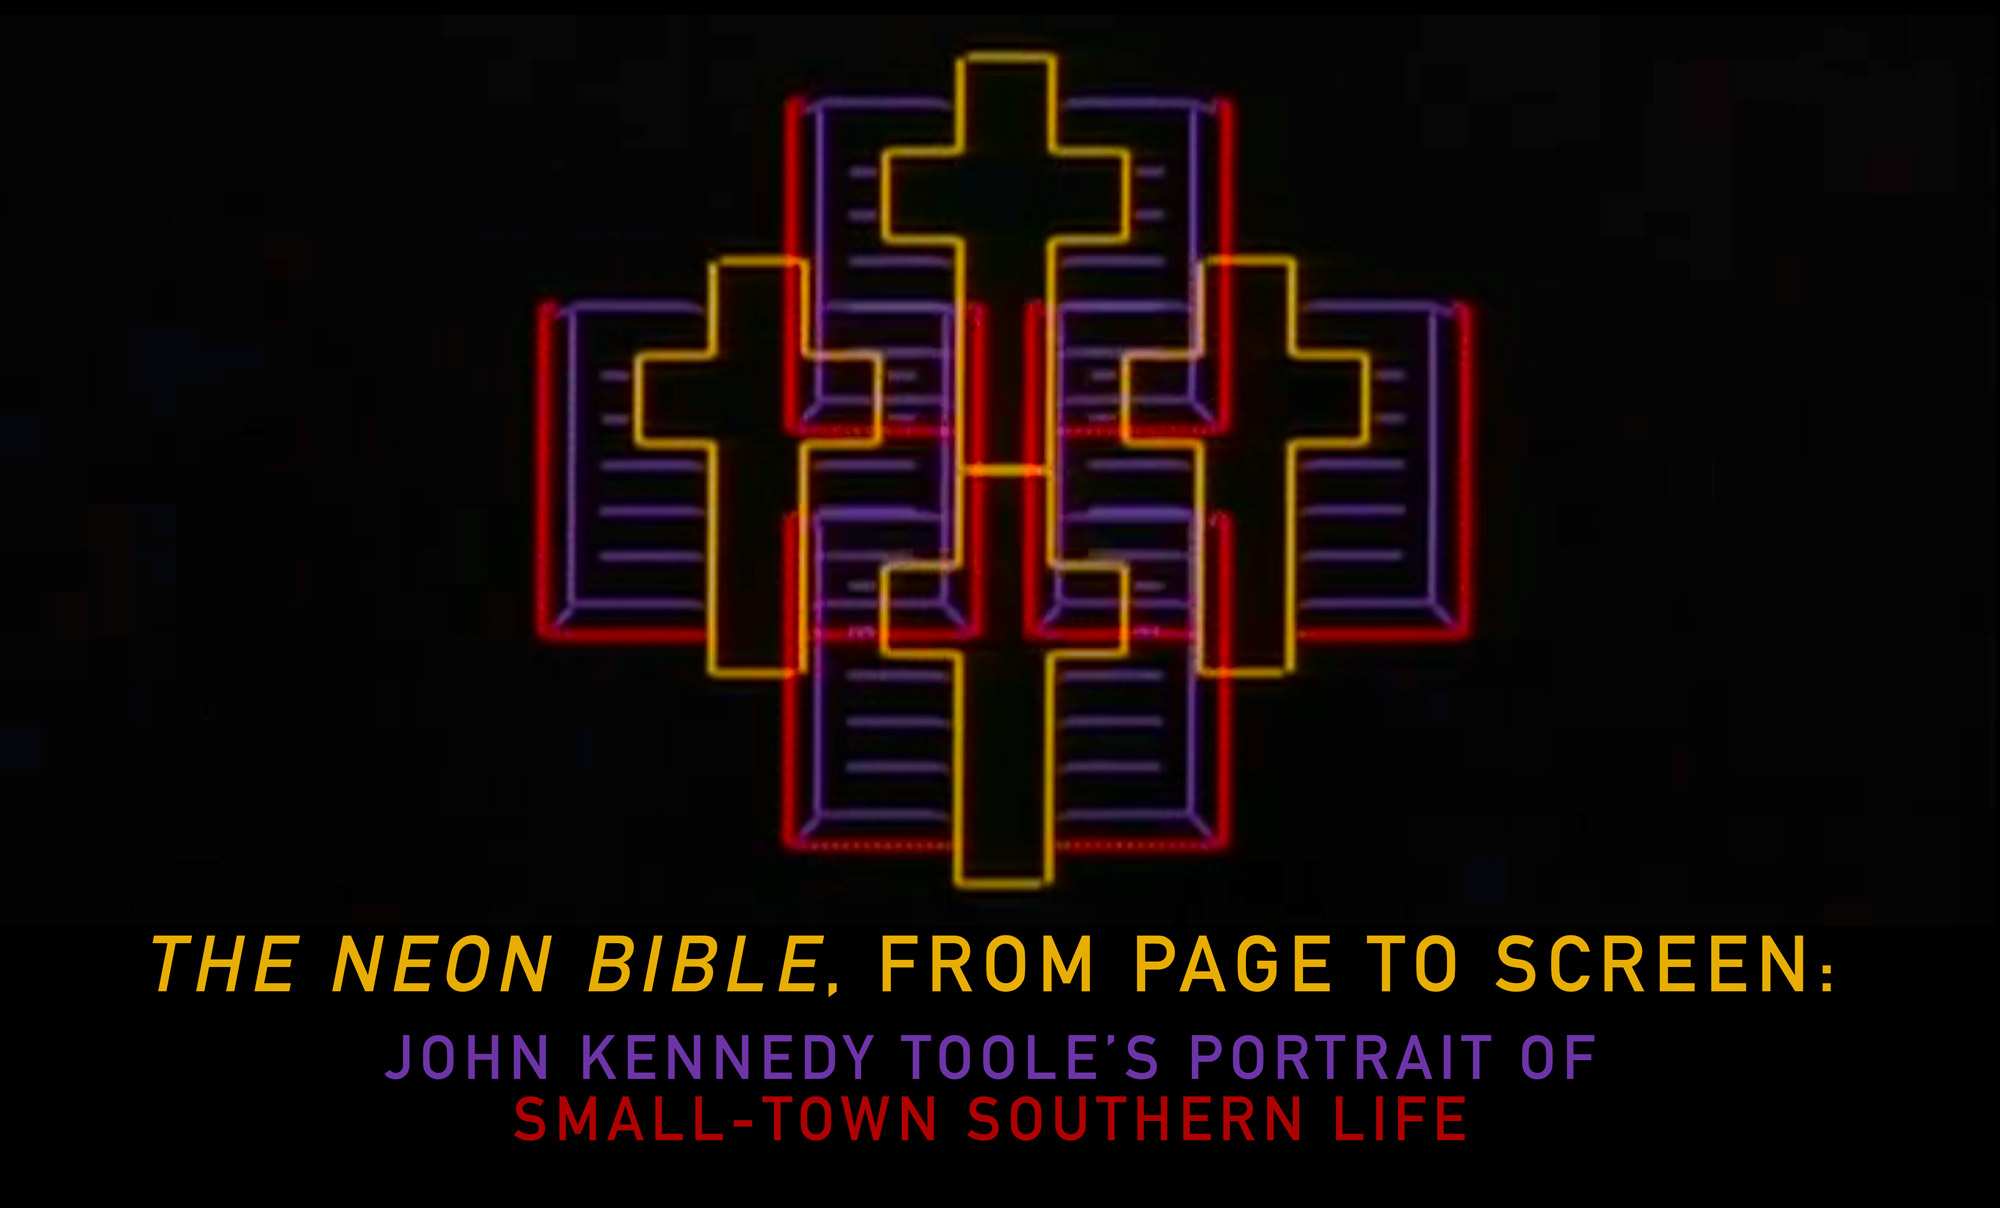 The Neon Bible, from Page to Screen: John Kennedy Toole’s Portrait of Small-Town Southern Life